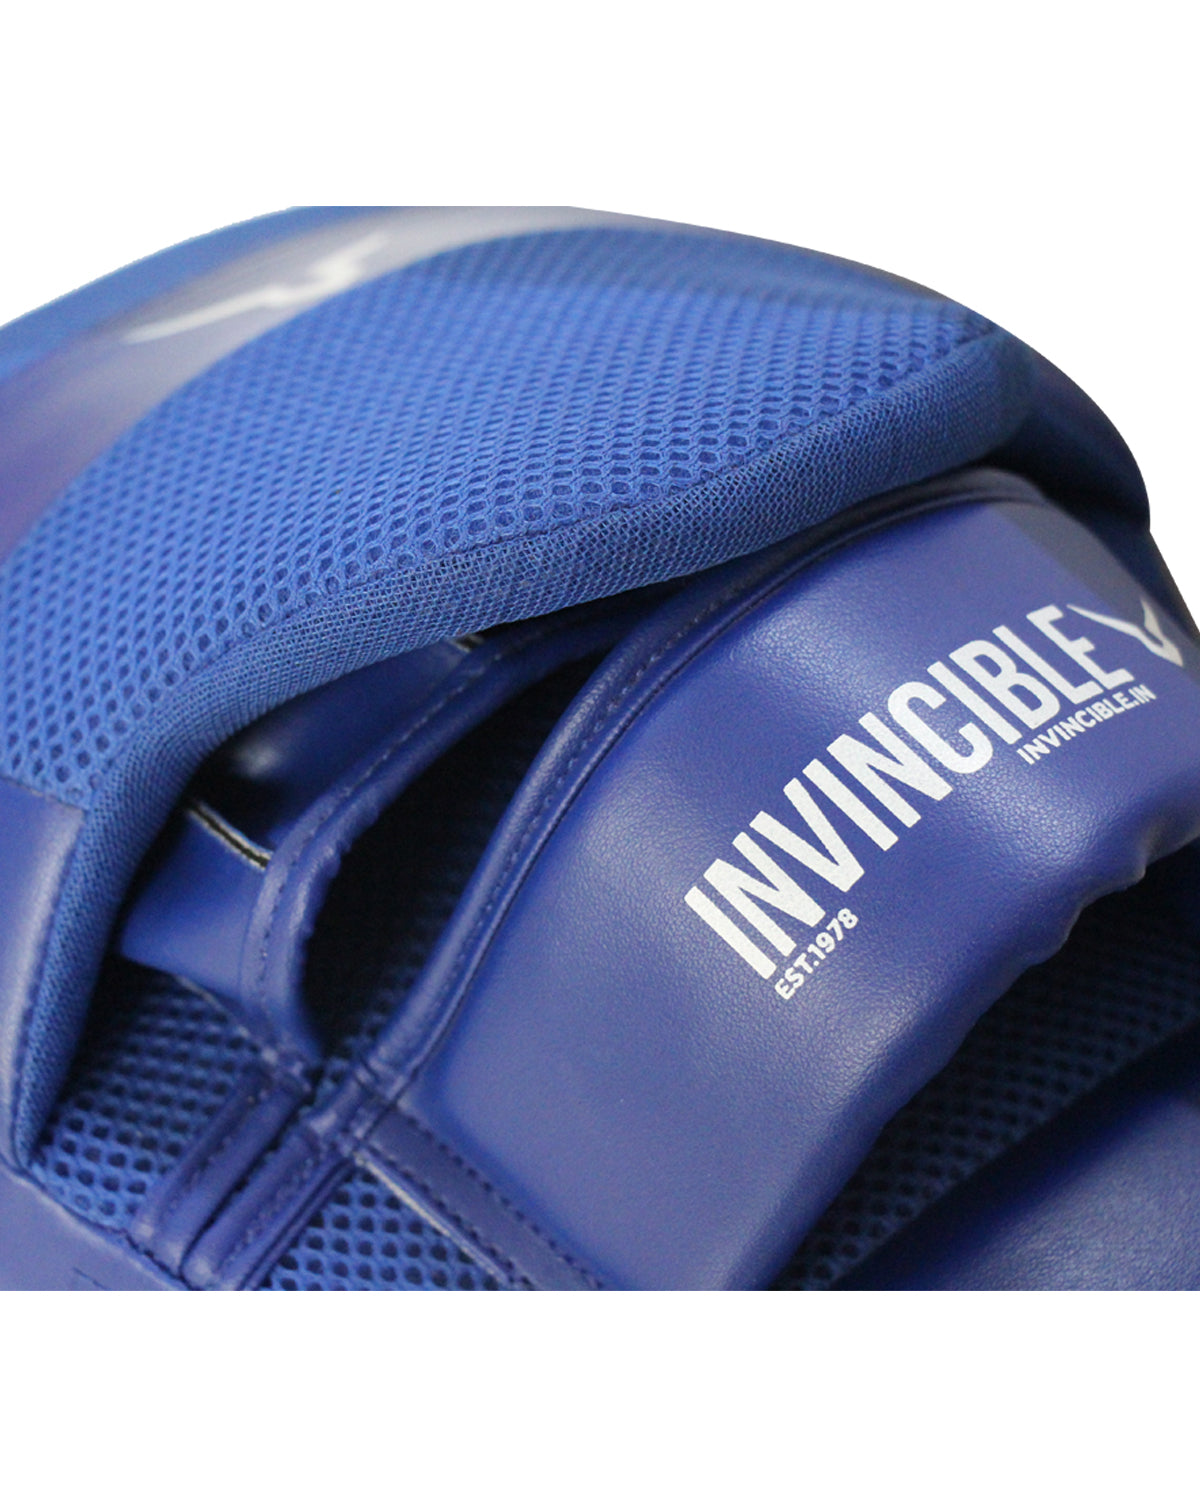 Invincible Essential Punch Mitts